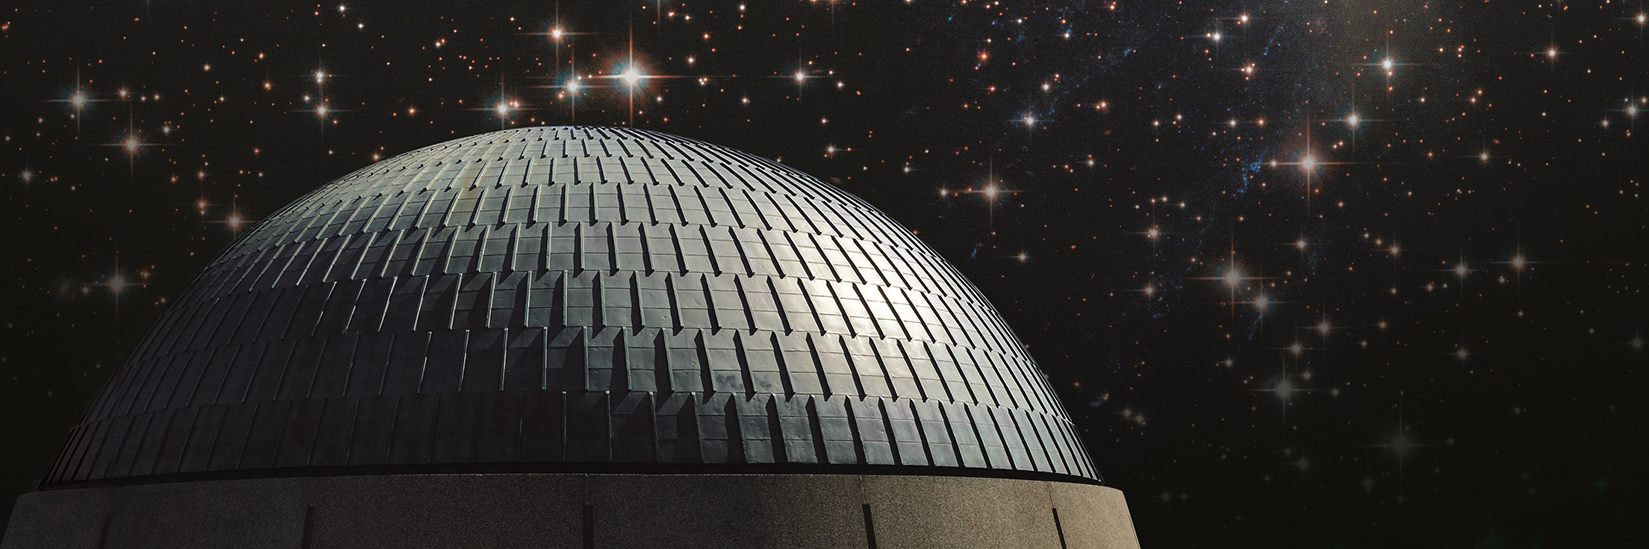 The exterior of the Planetarium dome in front of a starry night sky.